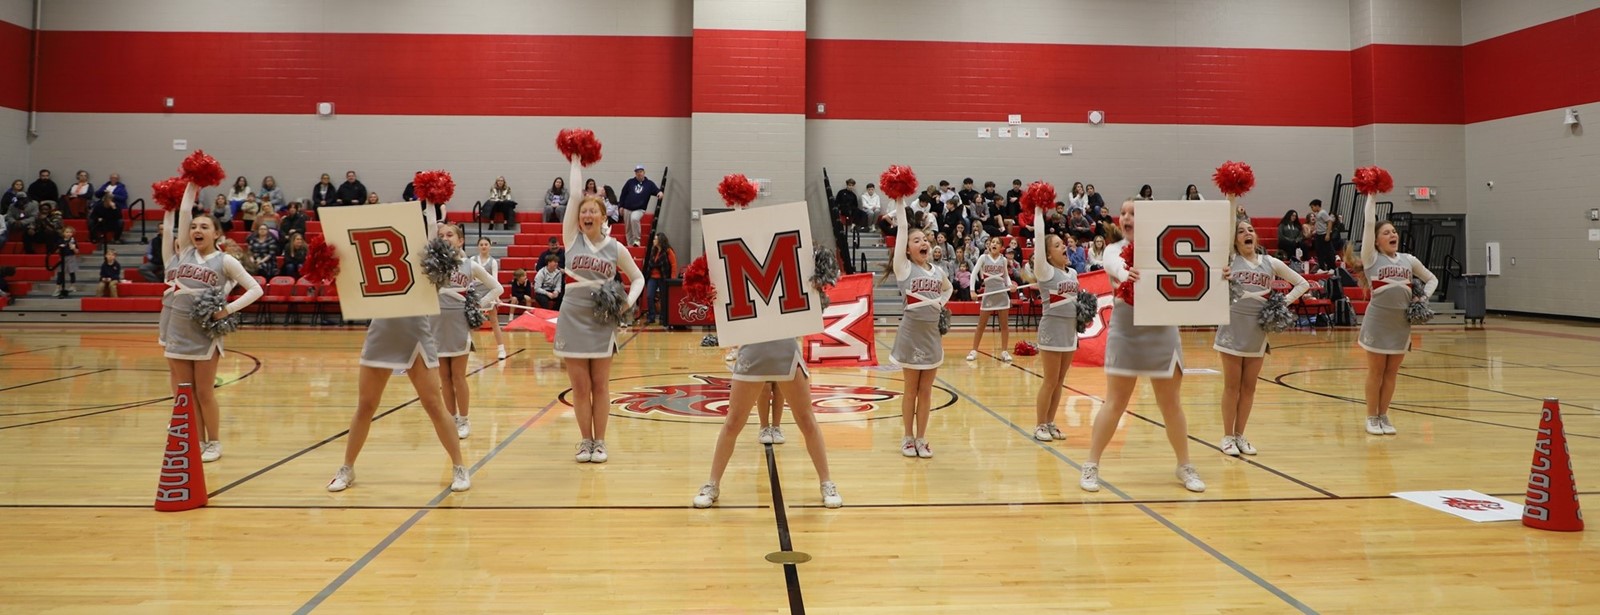 Cheer team holds up the letters B M S in the middle of a school gymnasium. 